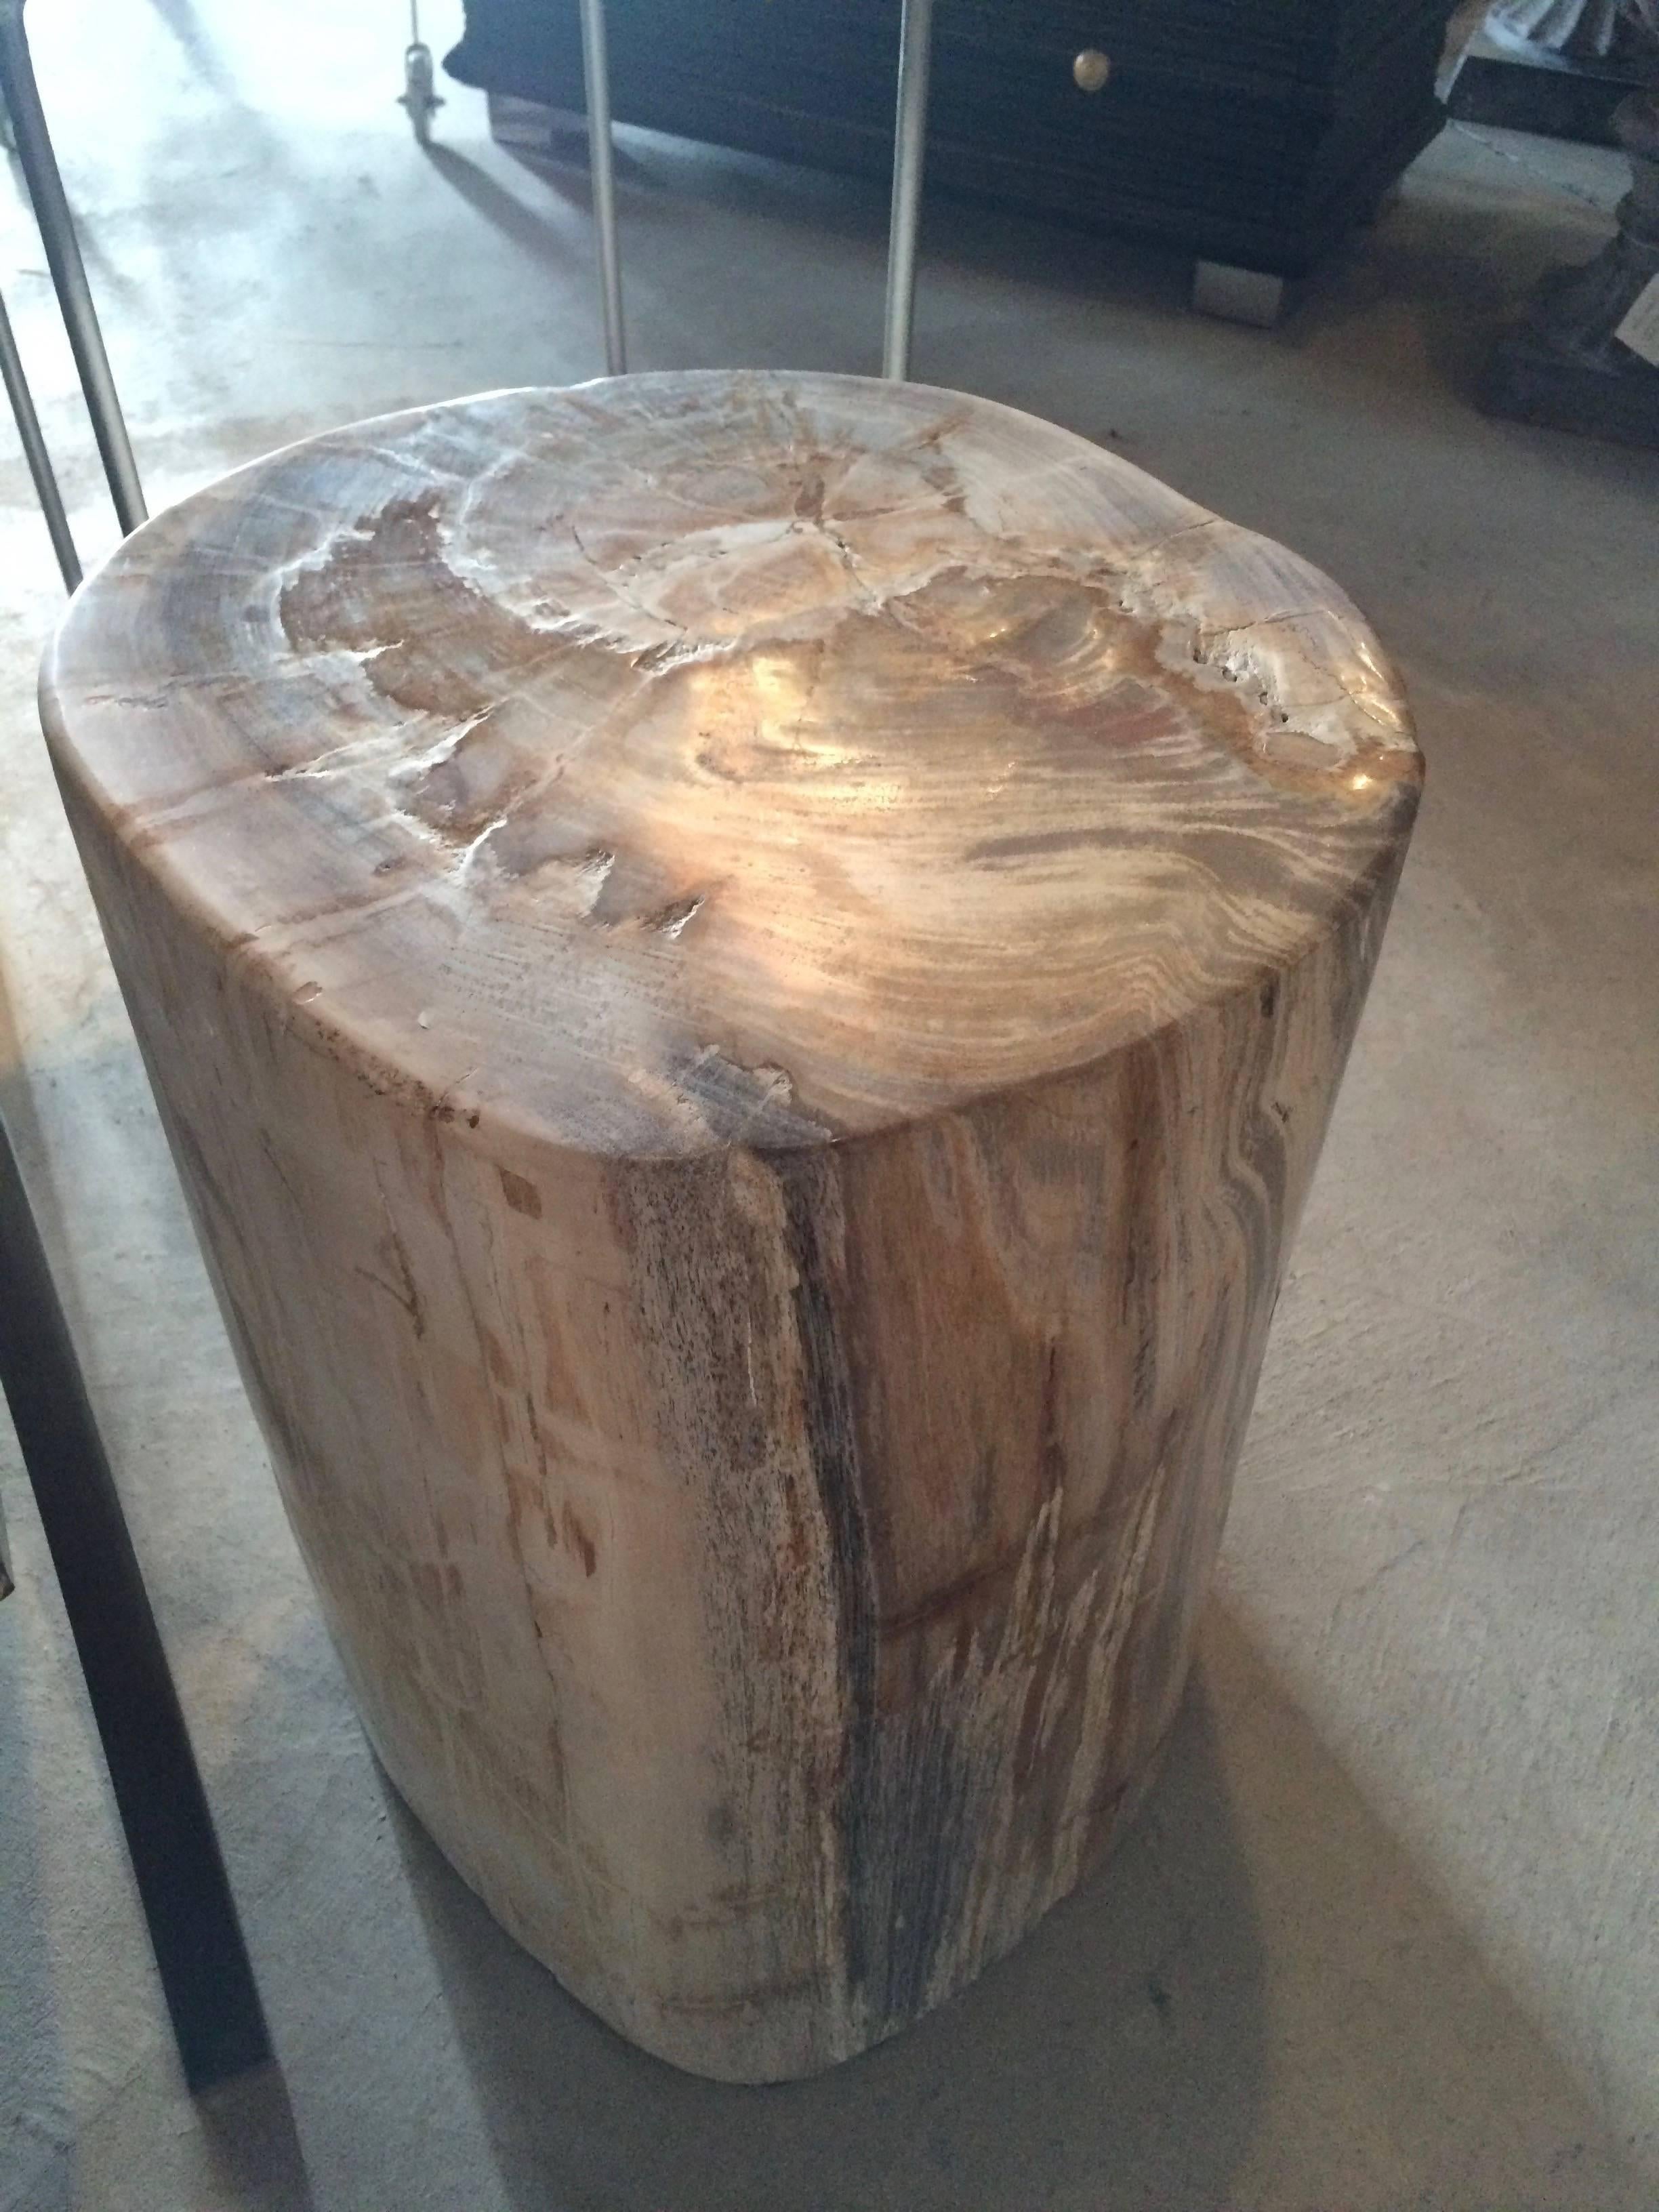 Petrified wood stump, we have pieces in various sizes and colorations. These pieces are a great compliment to the outdoor space as a table or use indoors as well. We also sell many for use inside the indoor or outdoor shower for sitting or storage